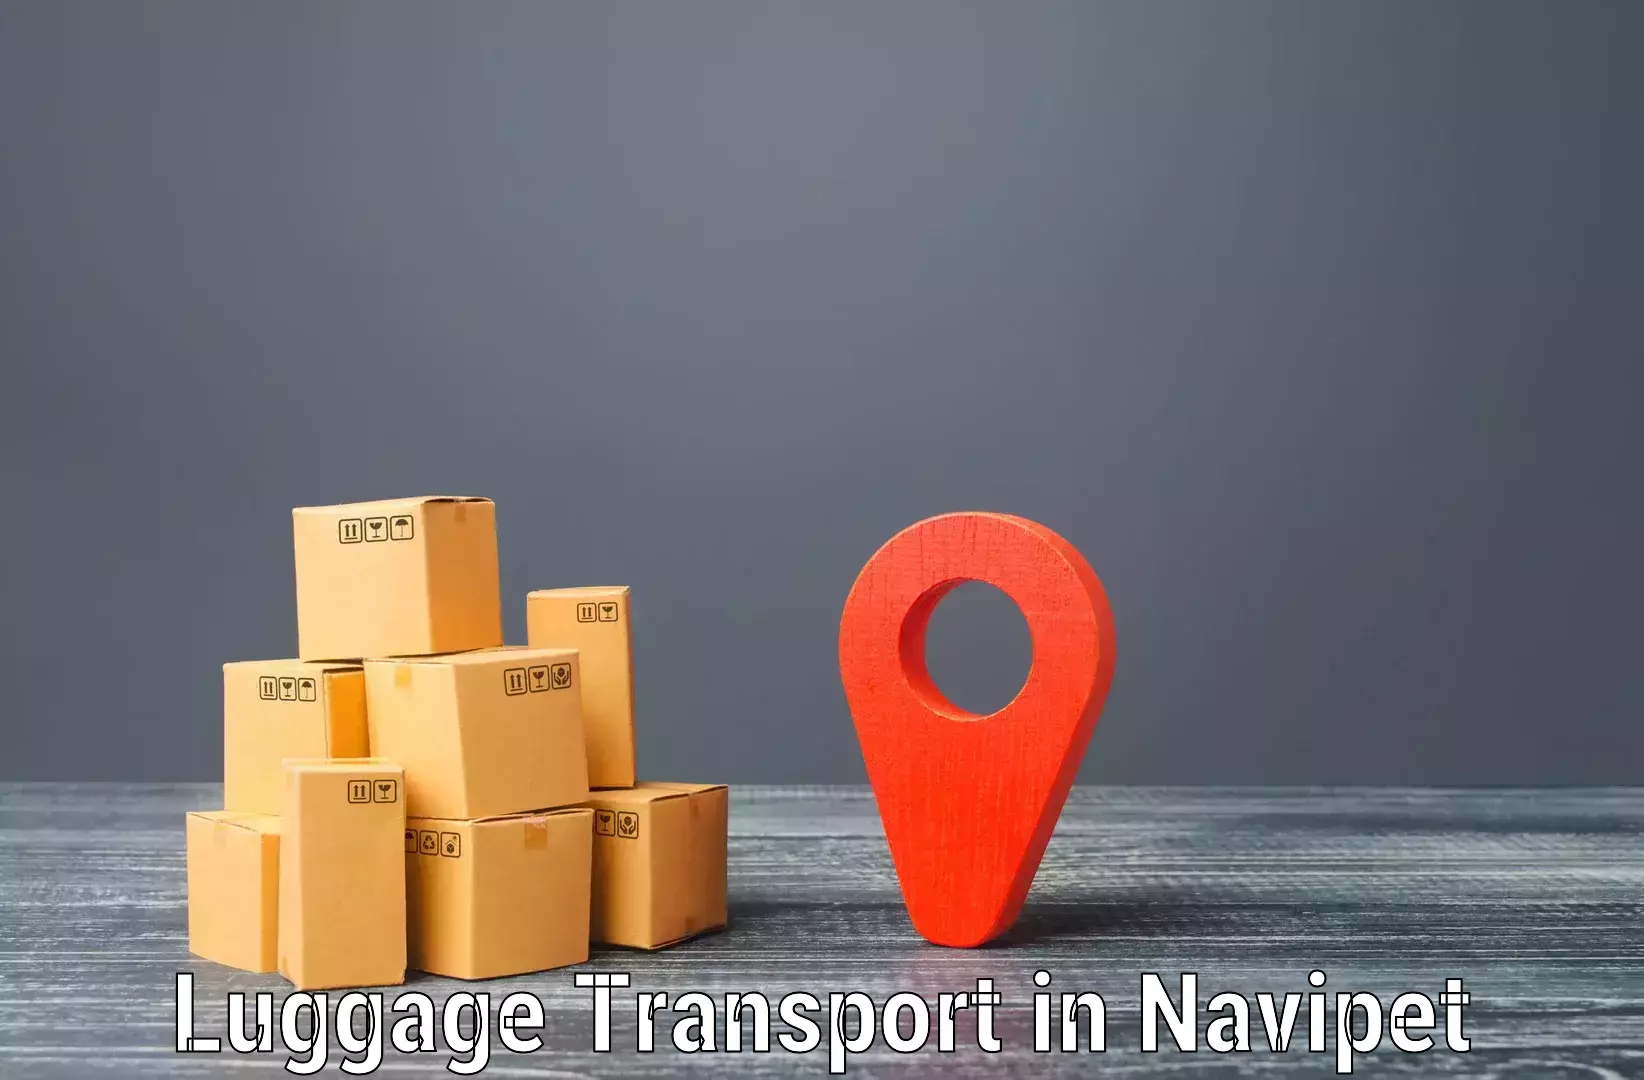 Doorstep luggage collection in Navipet